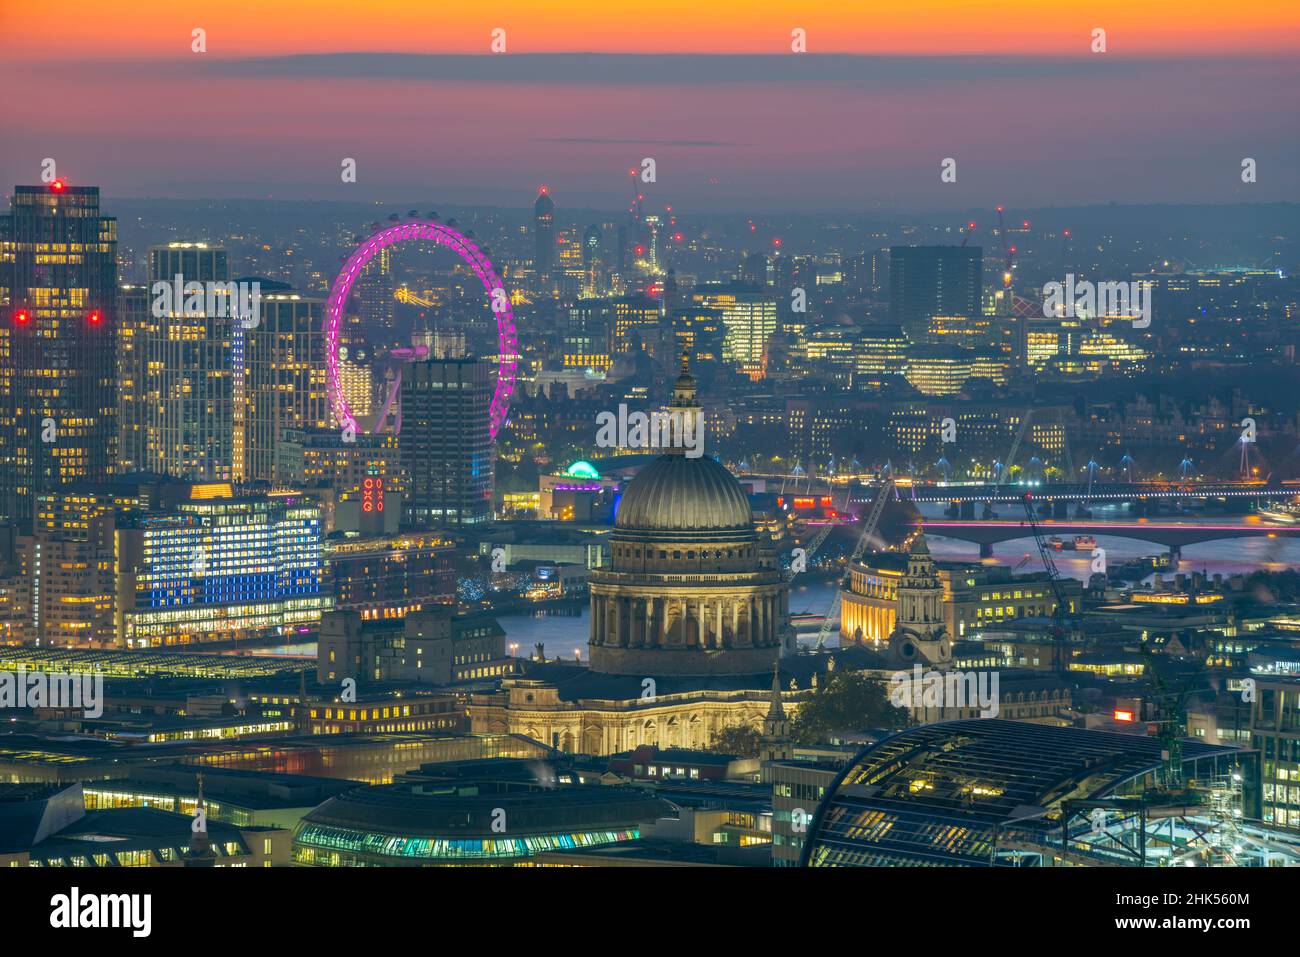 View of London Eye and St. Paul's Cathedral at dusk from the Principal Tower, London, England, United Kingdom, Europe Stock Photo